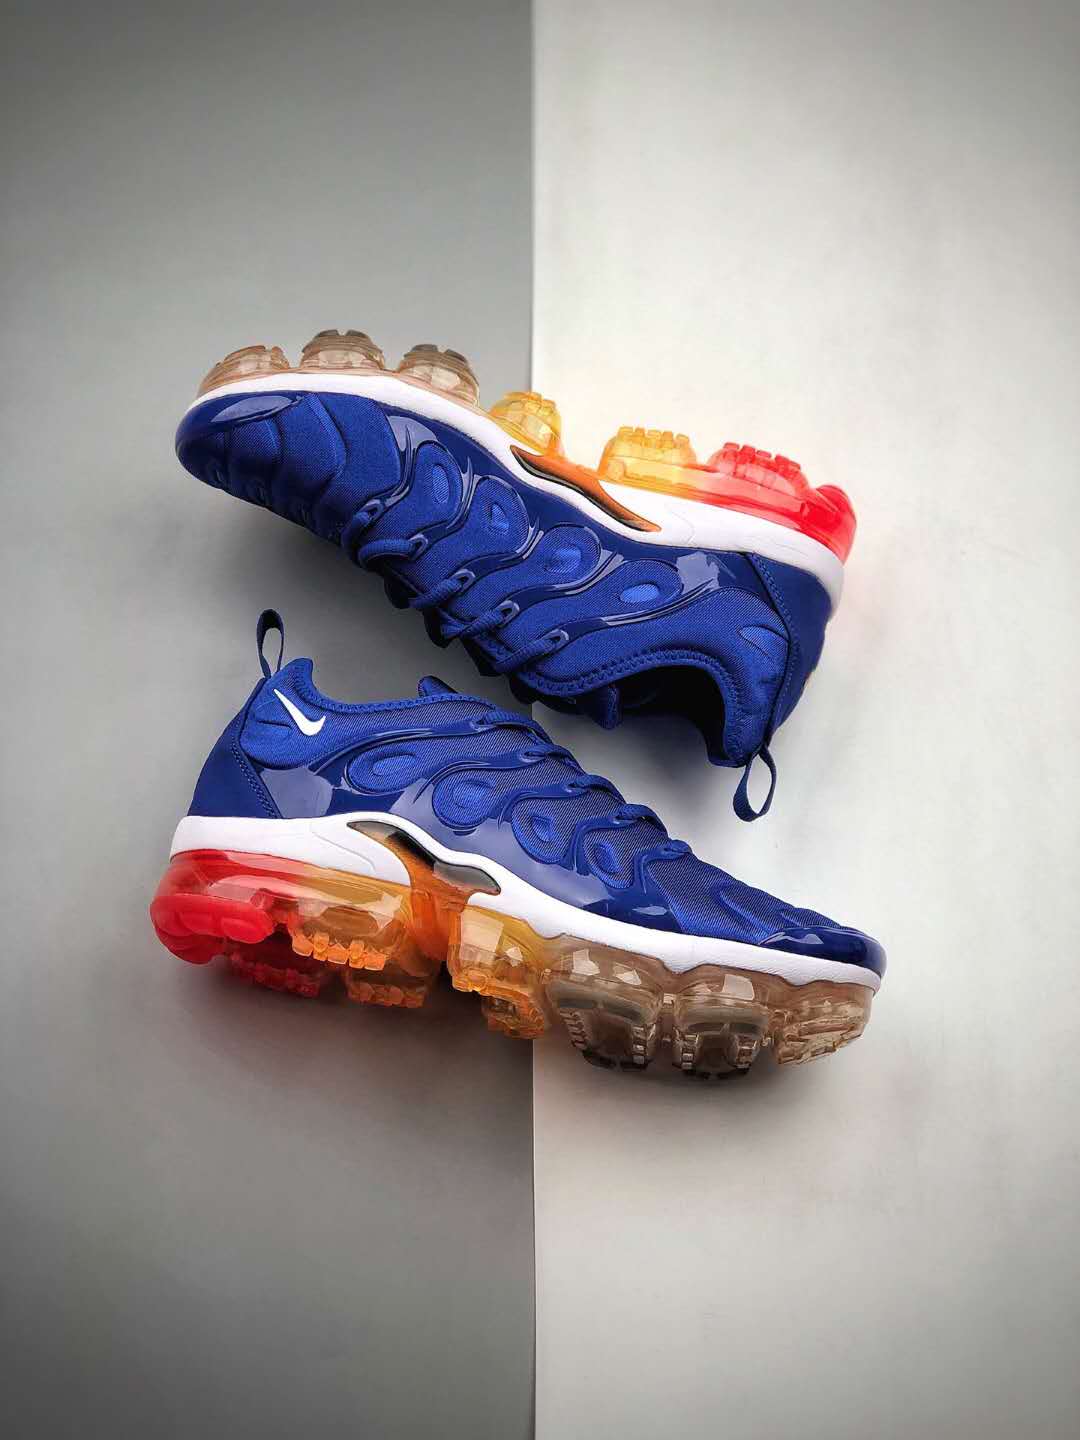 Nike Air VaporMax Plus 'Game Royal' 924453-403 - Unleash Your Style with the Ultimate Fusion of Comfort and Performance